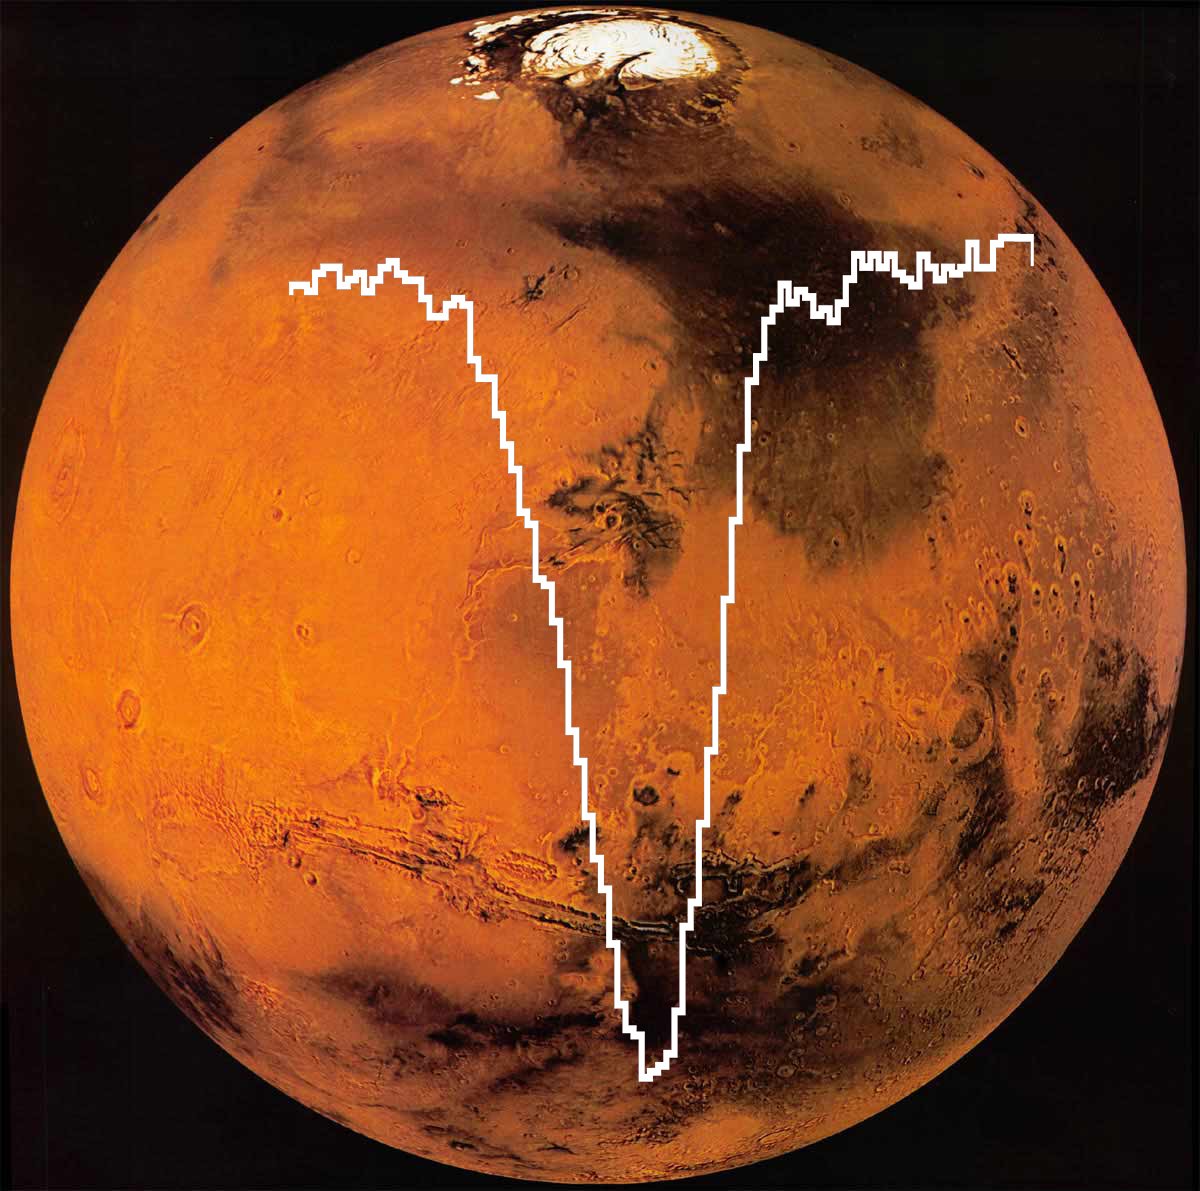 NASA announces there's oxygen on Mars